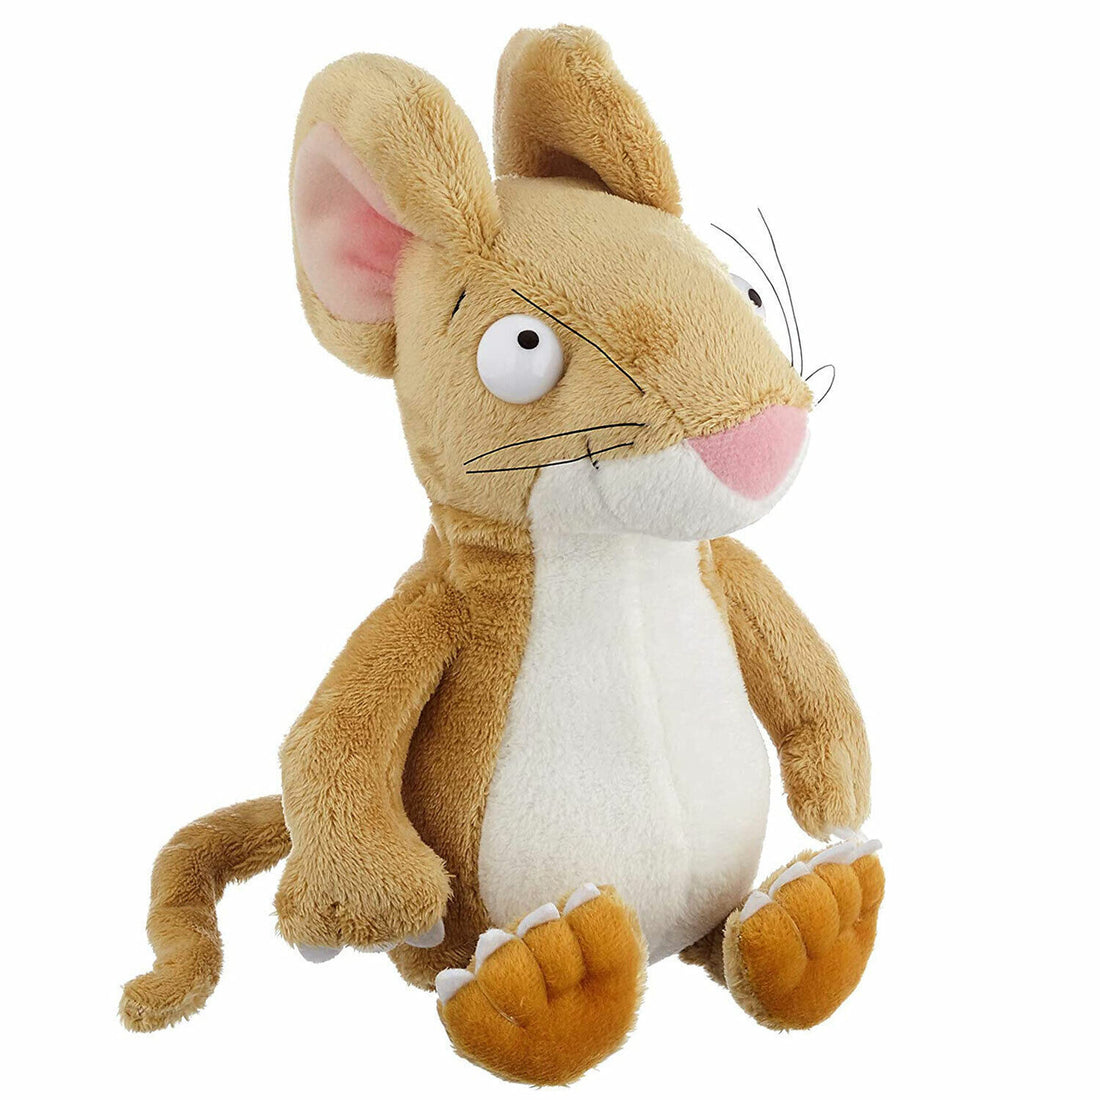 Aurora presents The Gruffalo Plush Toy in a variety of sizes available - MOUSE 9 INCH